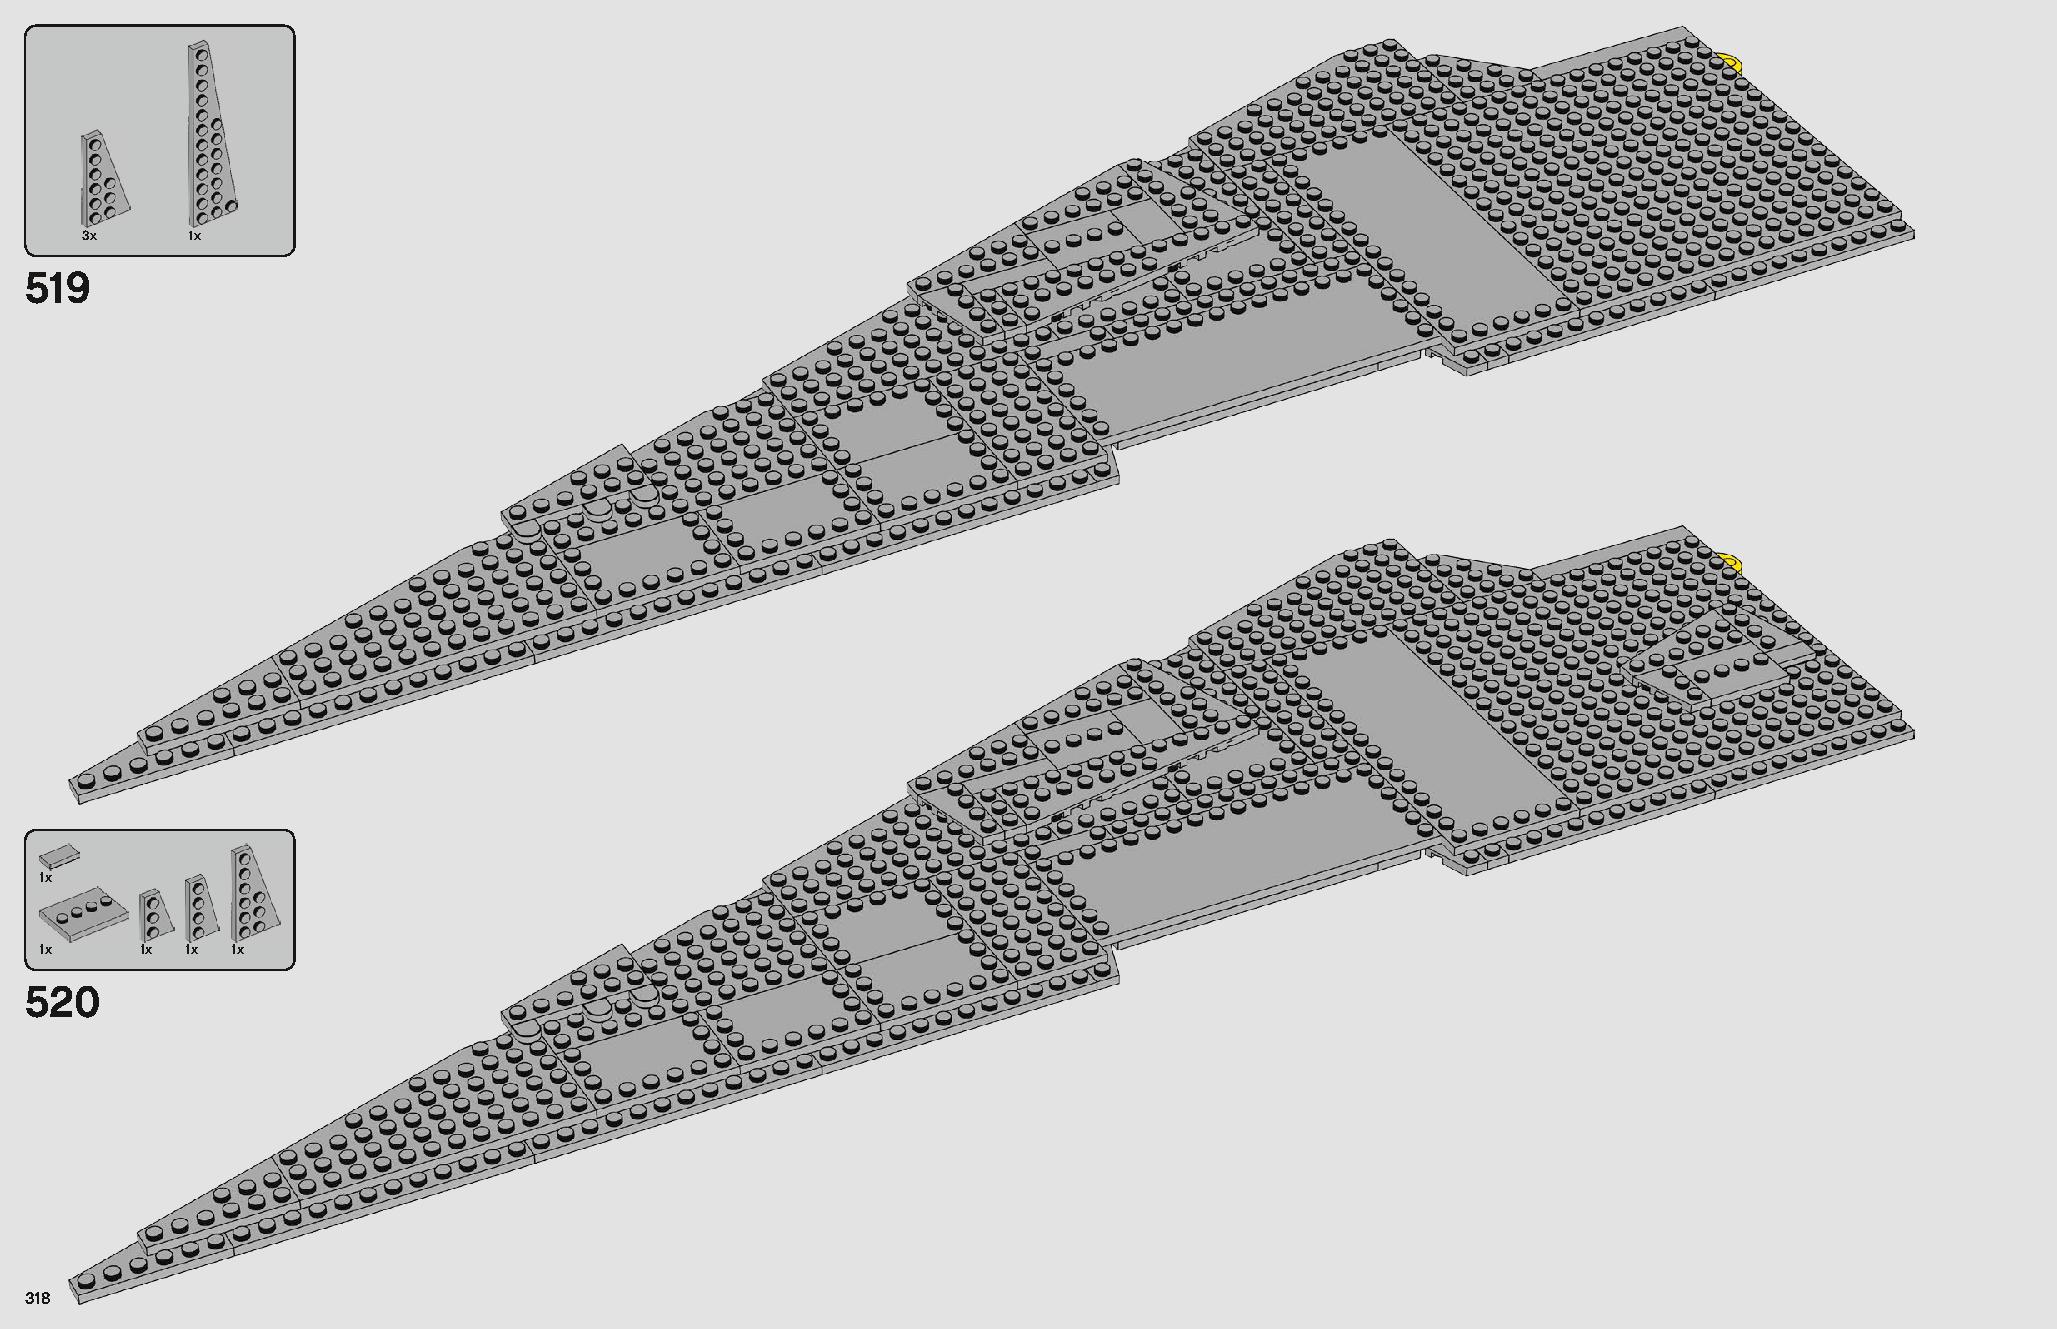 Imperial Star Destroyer 75252 LEGO information LEGO instructions 318 page